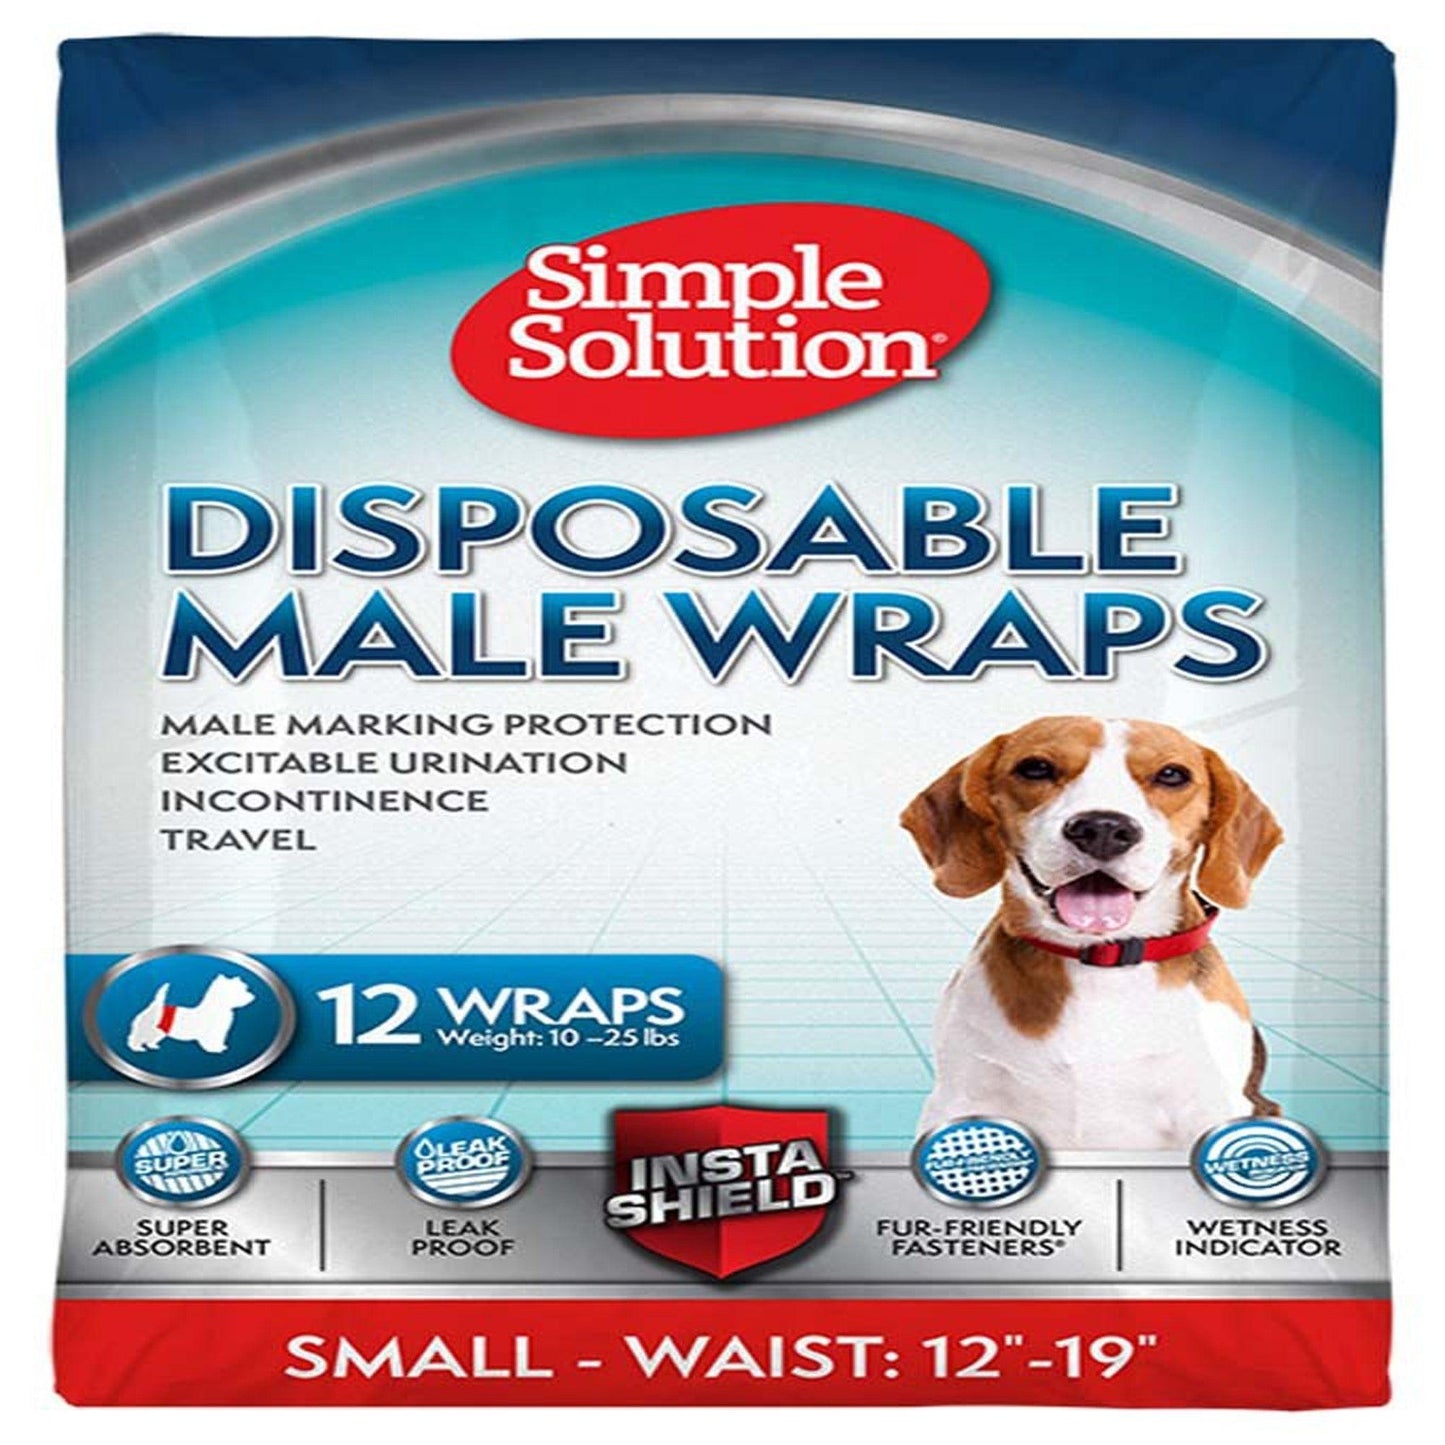 Small dog disposable male wraps